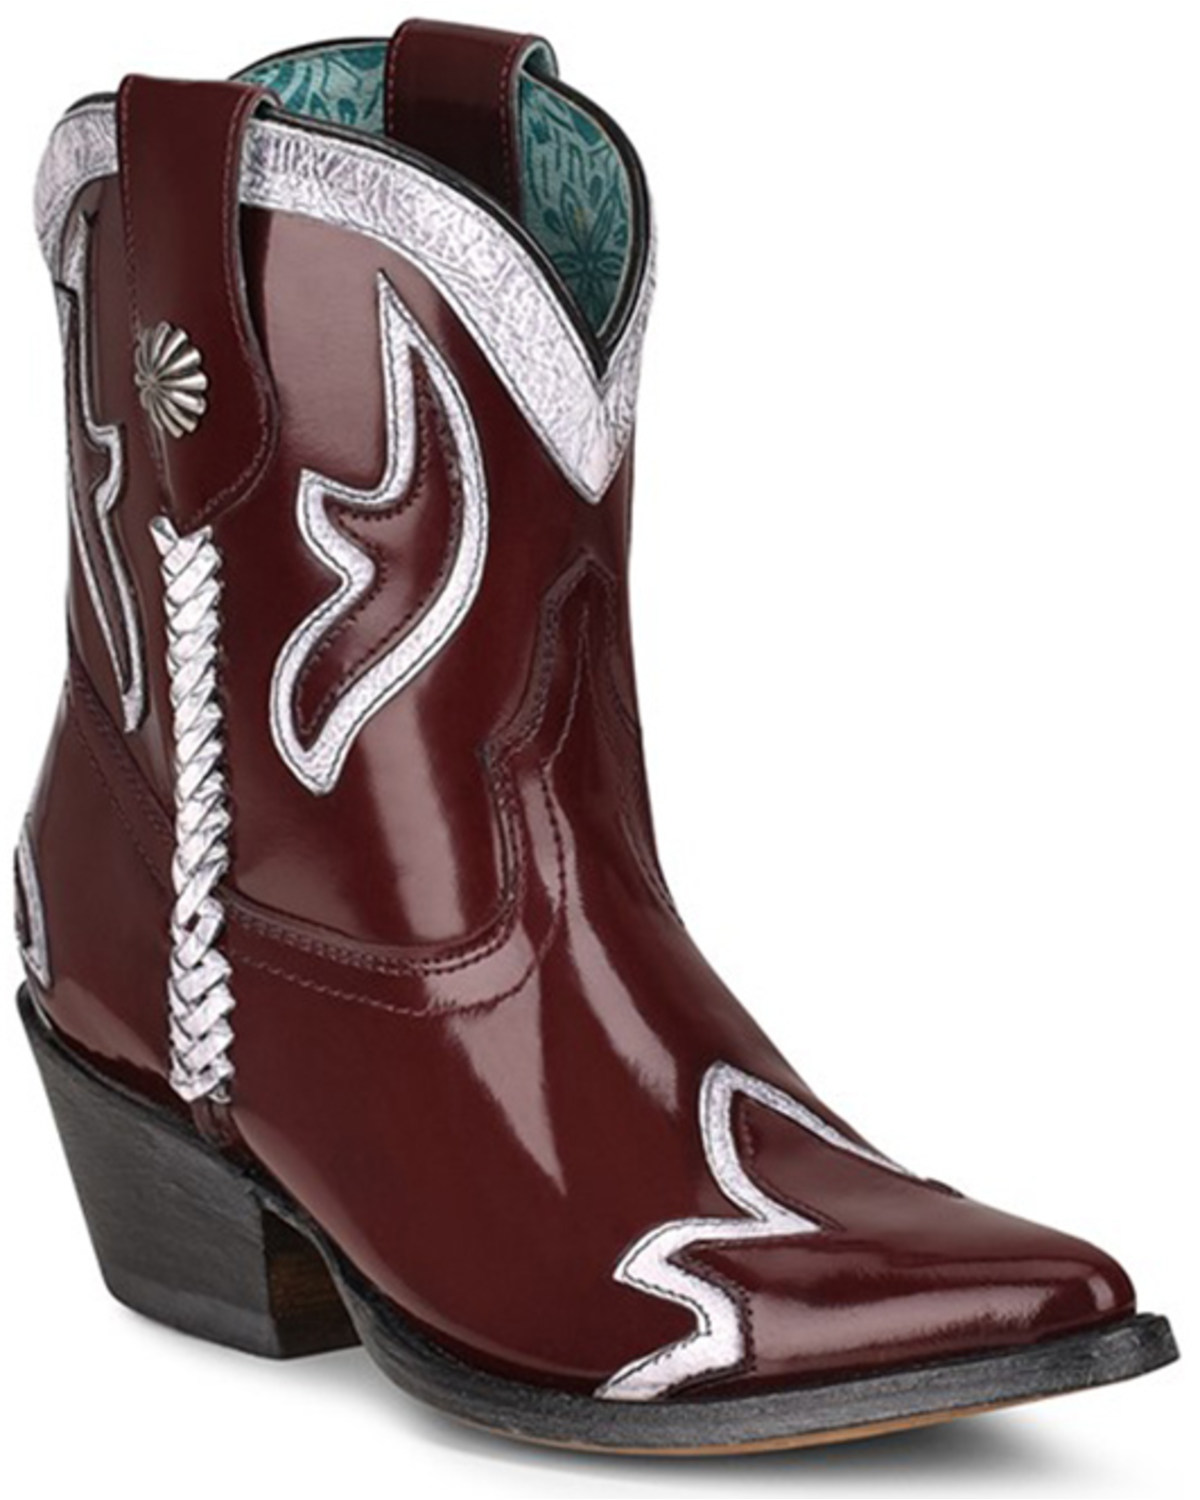 Corral Women's Burgundy Embroidery Western Booties - Pointed Toe